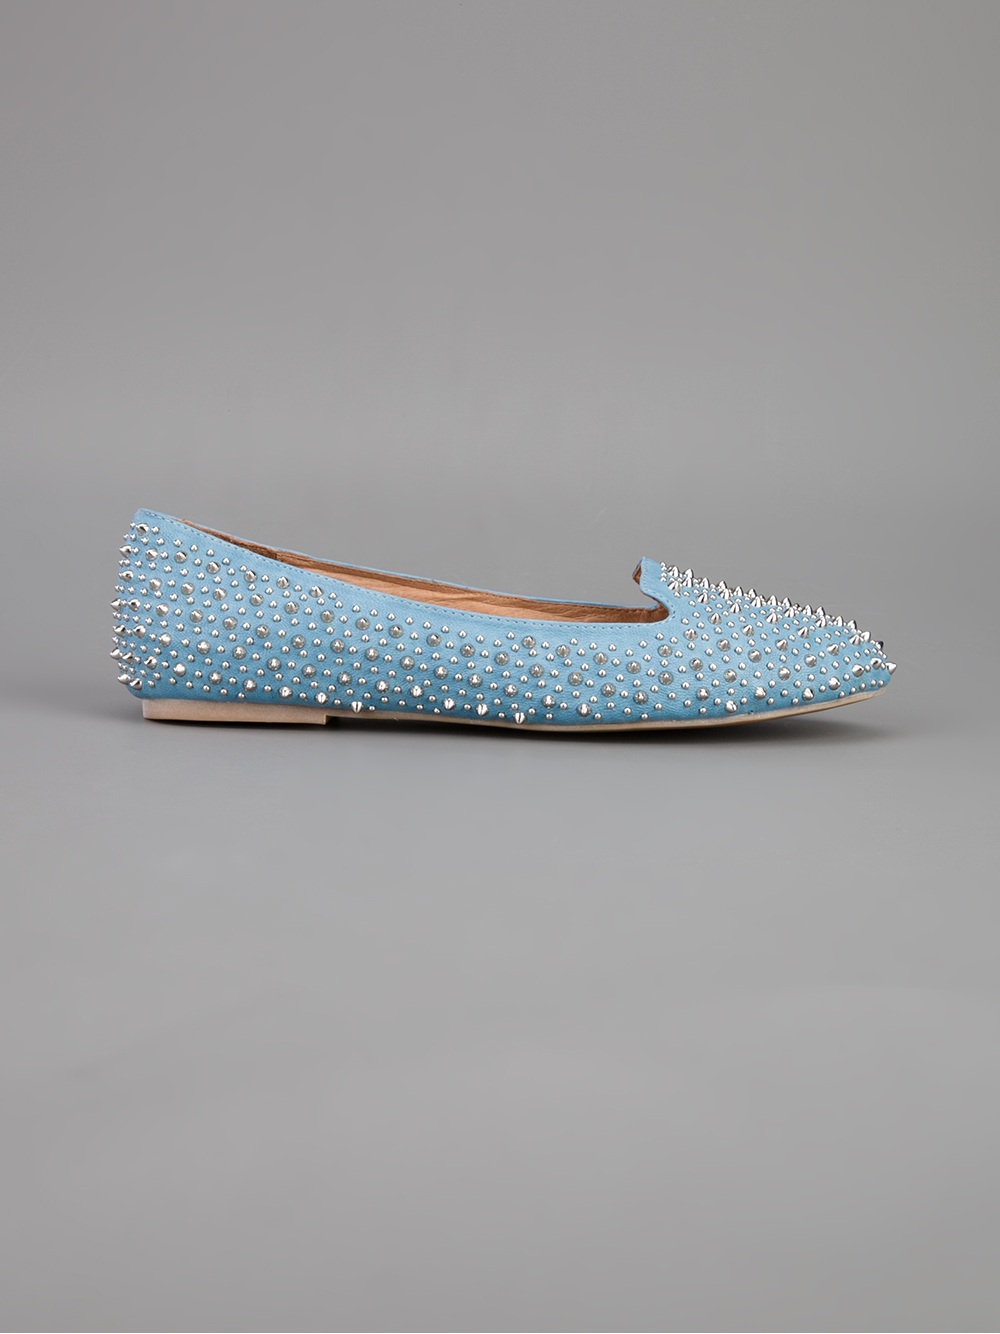 Jeffrey Campbell Martini Spiked Loafer in Blue - Lyst